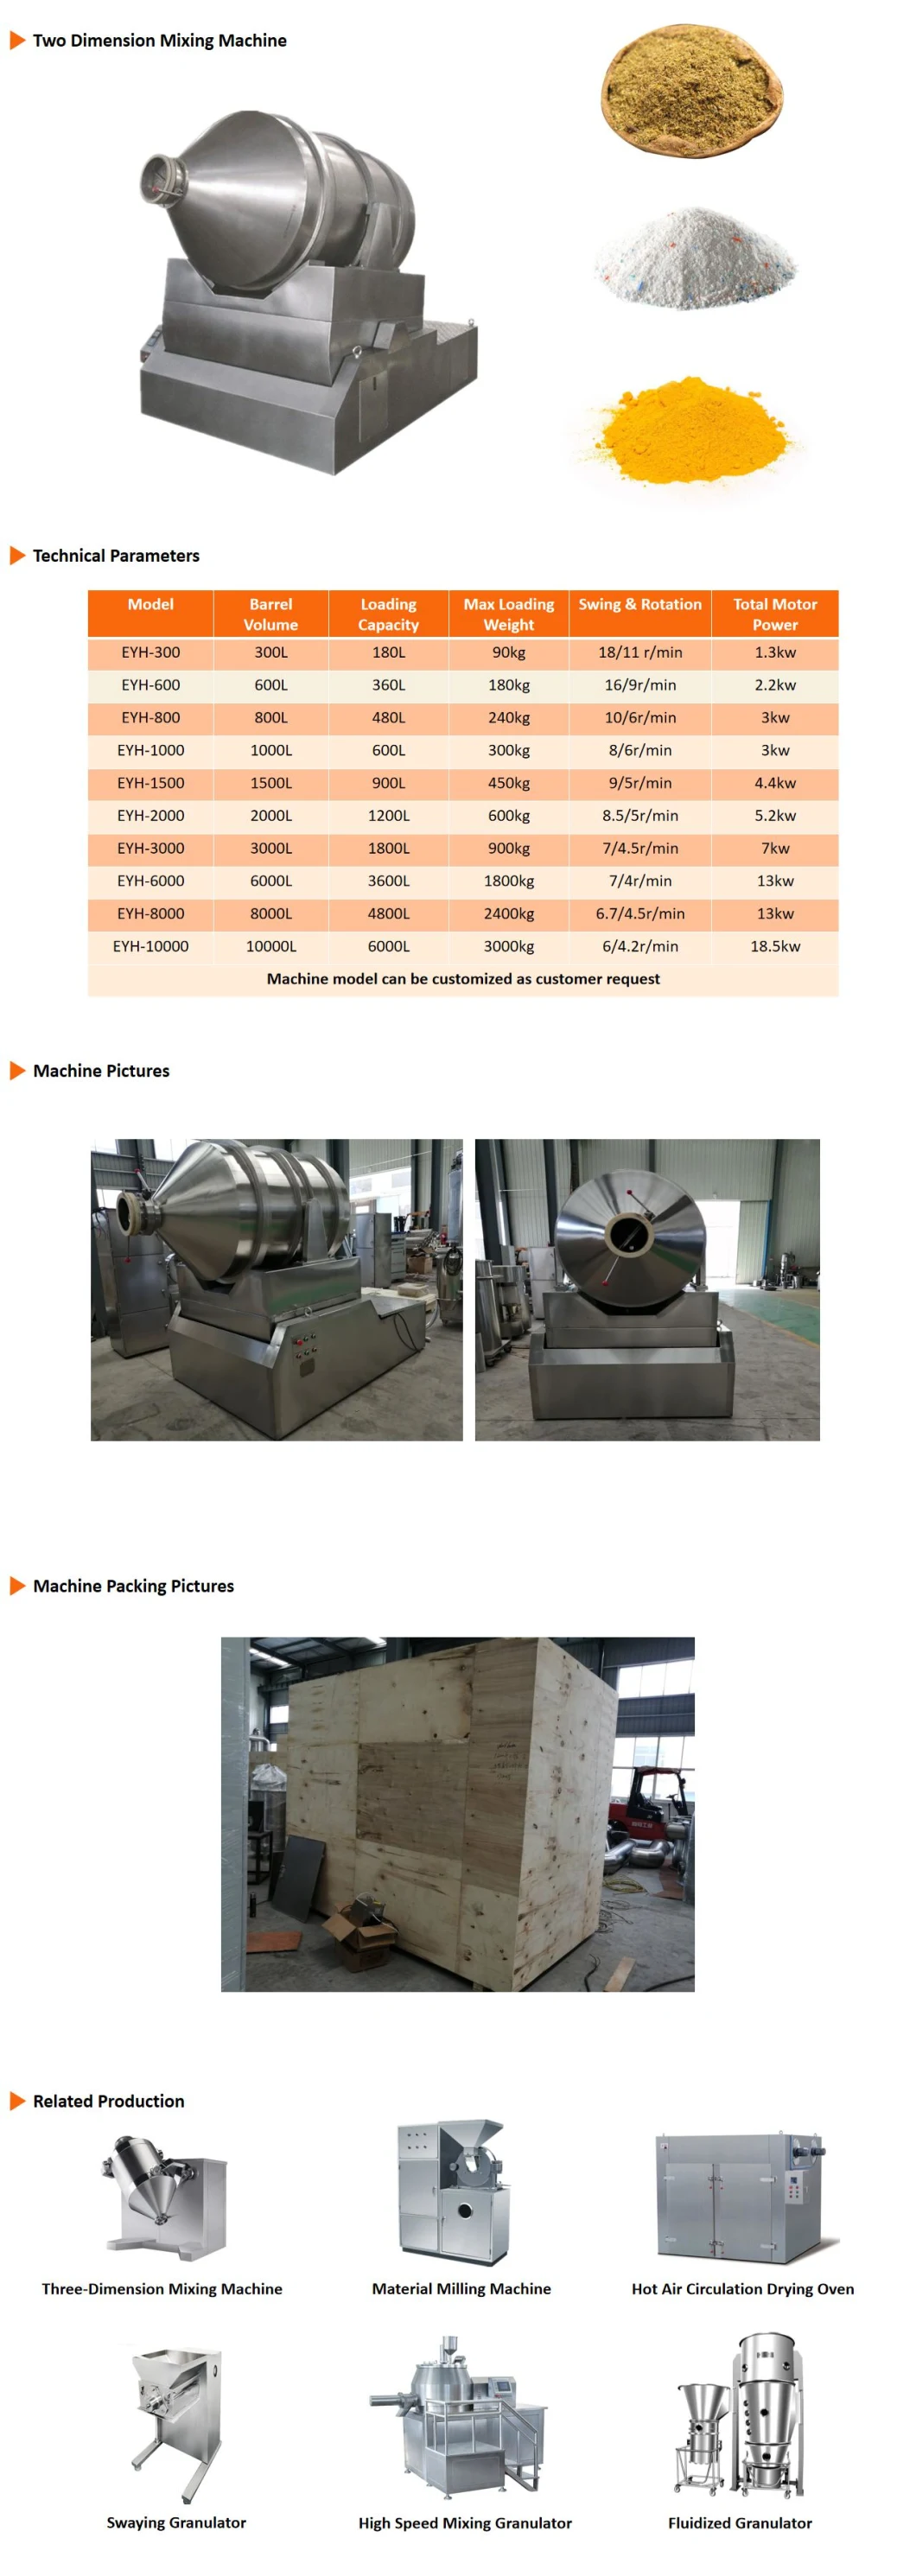 Eyh Series Two Dimension 2D Motion Pharmaceutical and Chemical Powder Mixer Blender